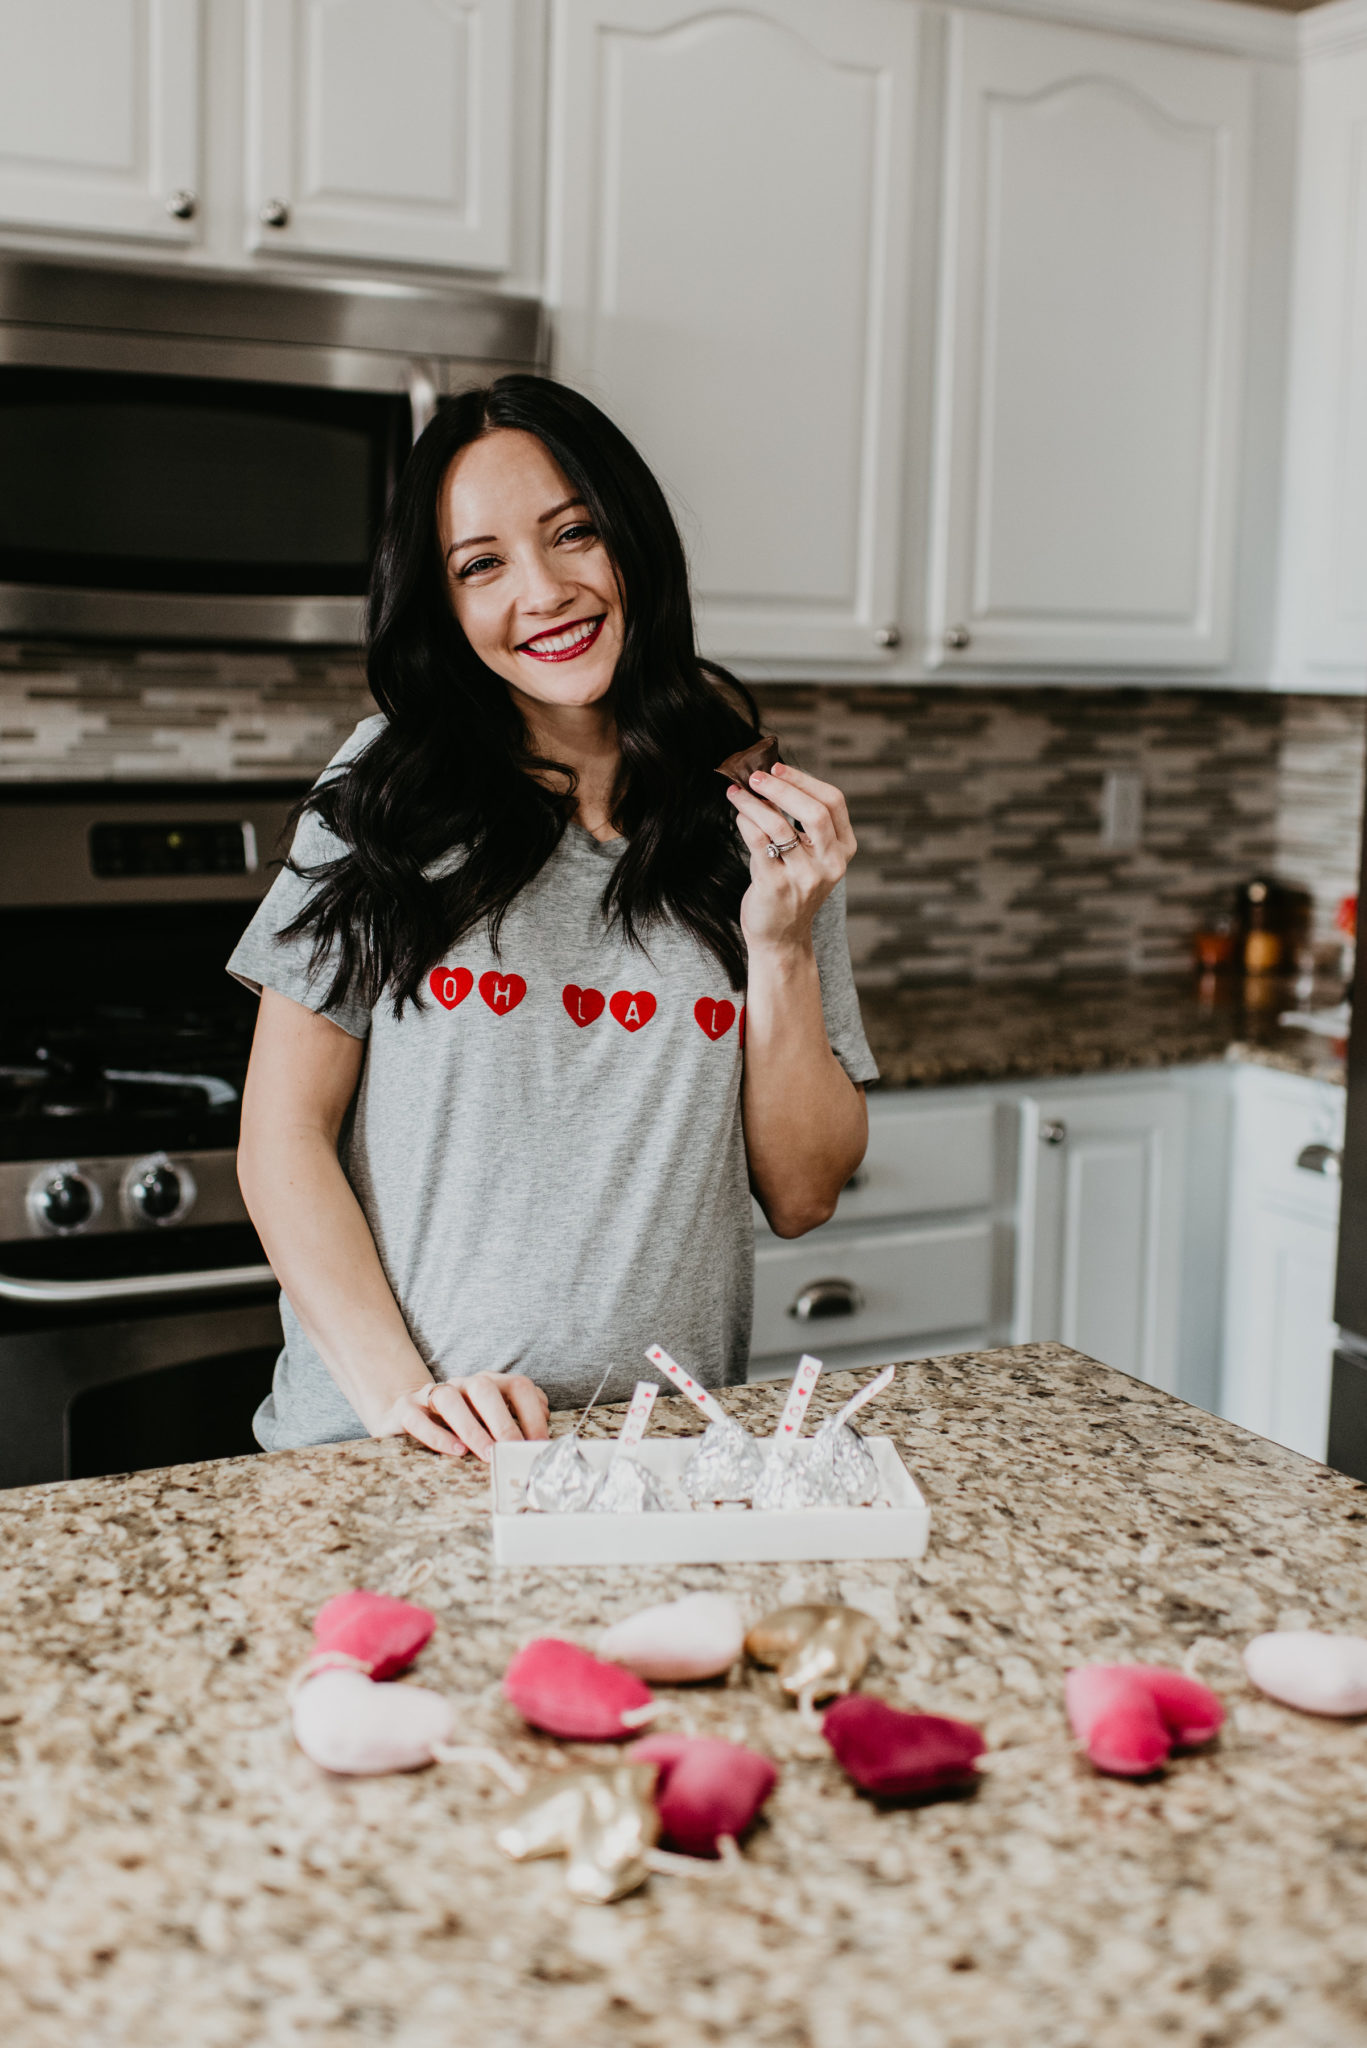 The DIY Valentines Day Gift I Make Every Year by popular Las Vegas lifestyle blogger Outfits & Outings